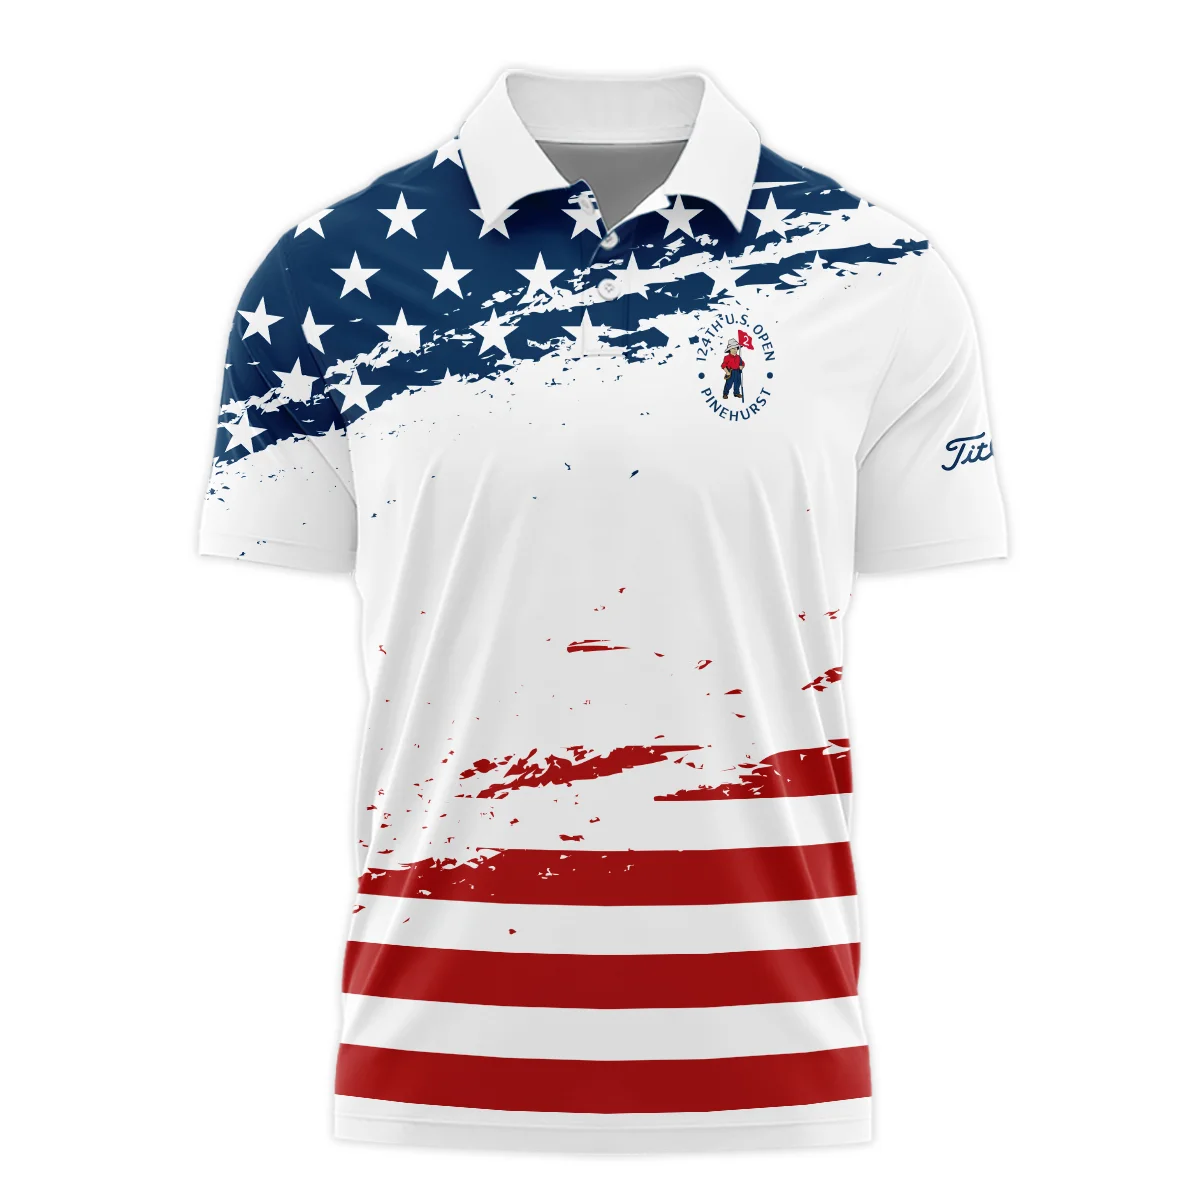 124th U.S. Open Pinehurst Special Version Titleist Polo Shirt Blue Red White Color Polo Shirt For Men